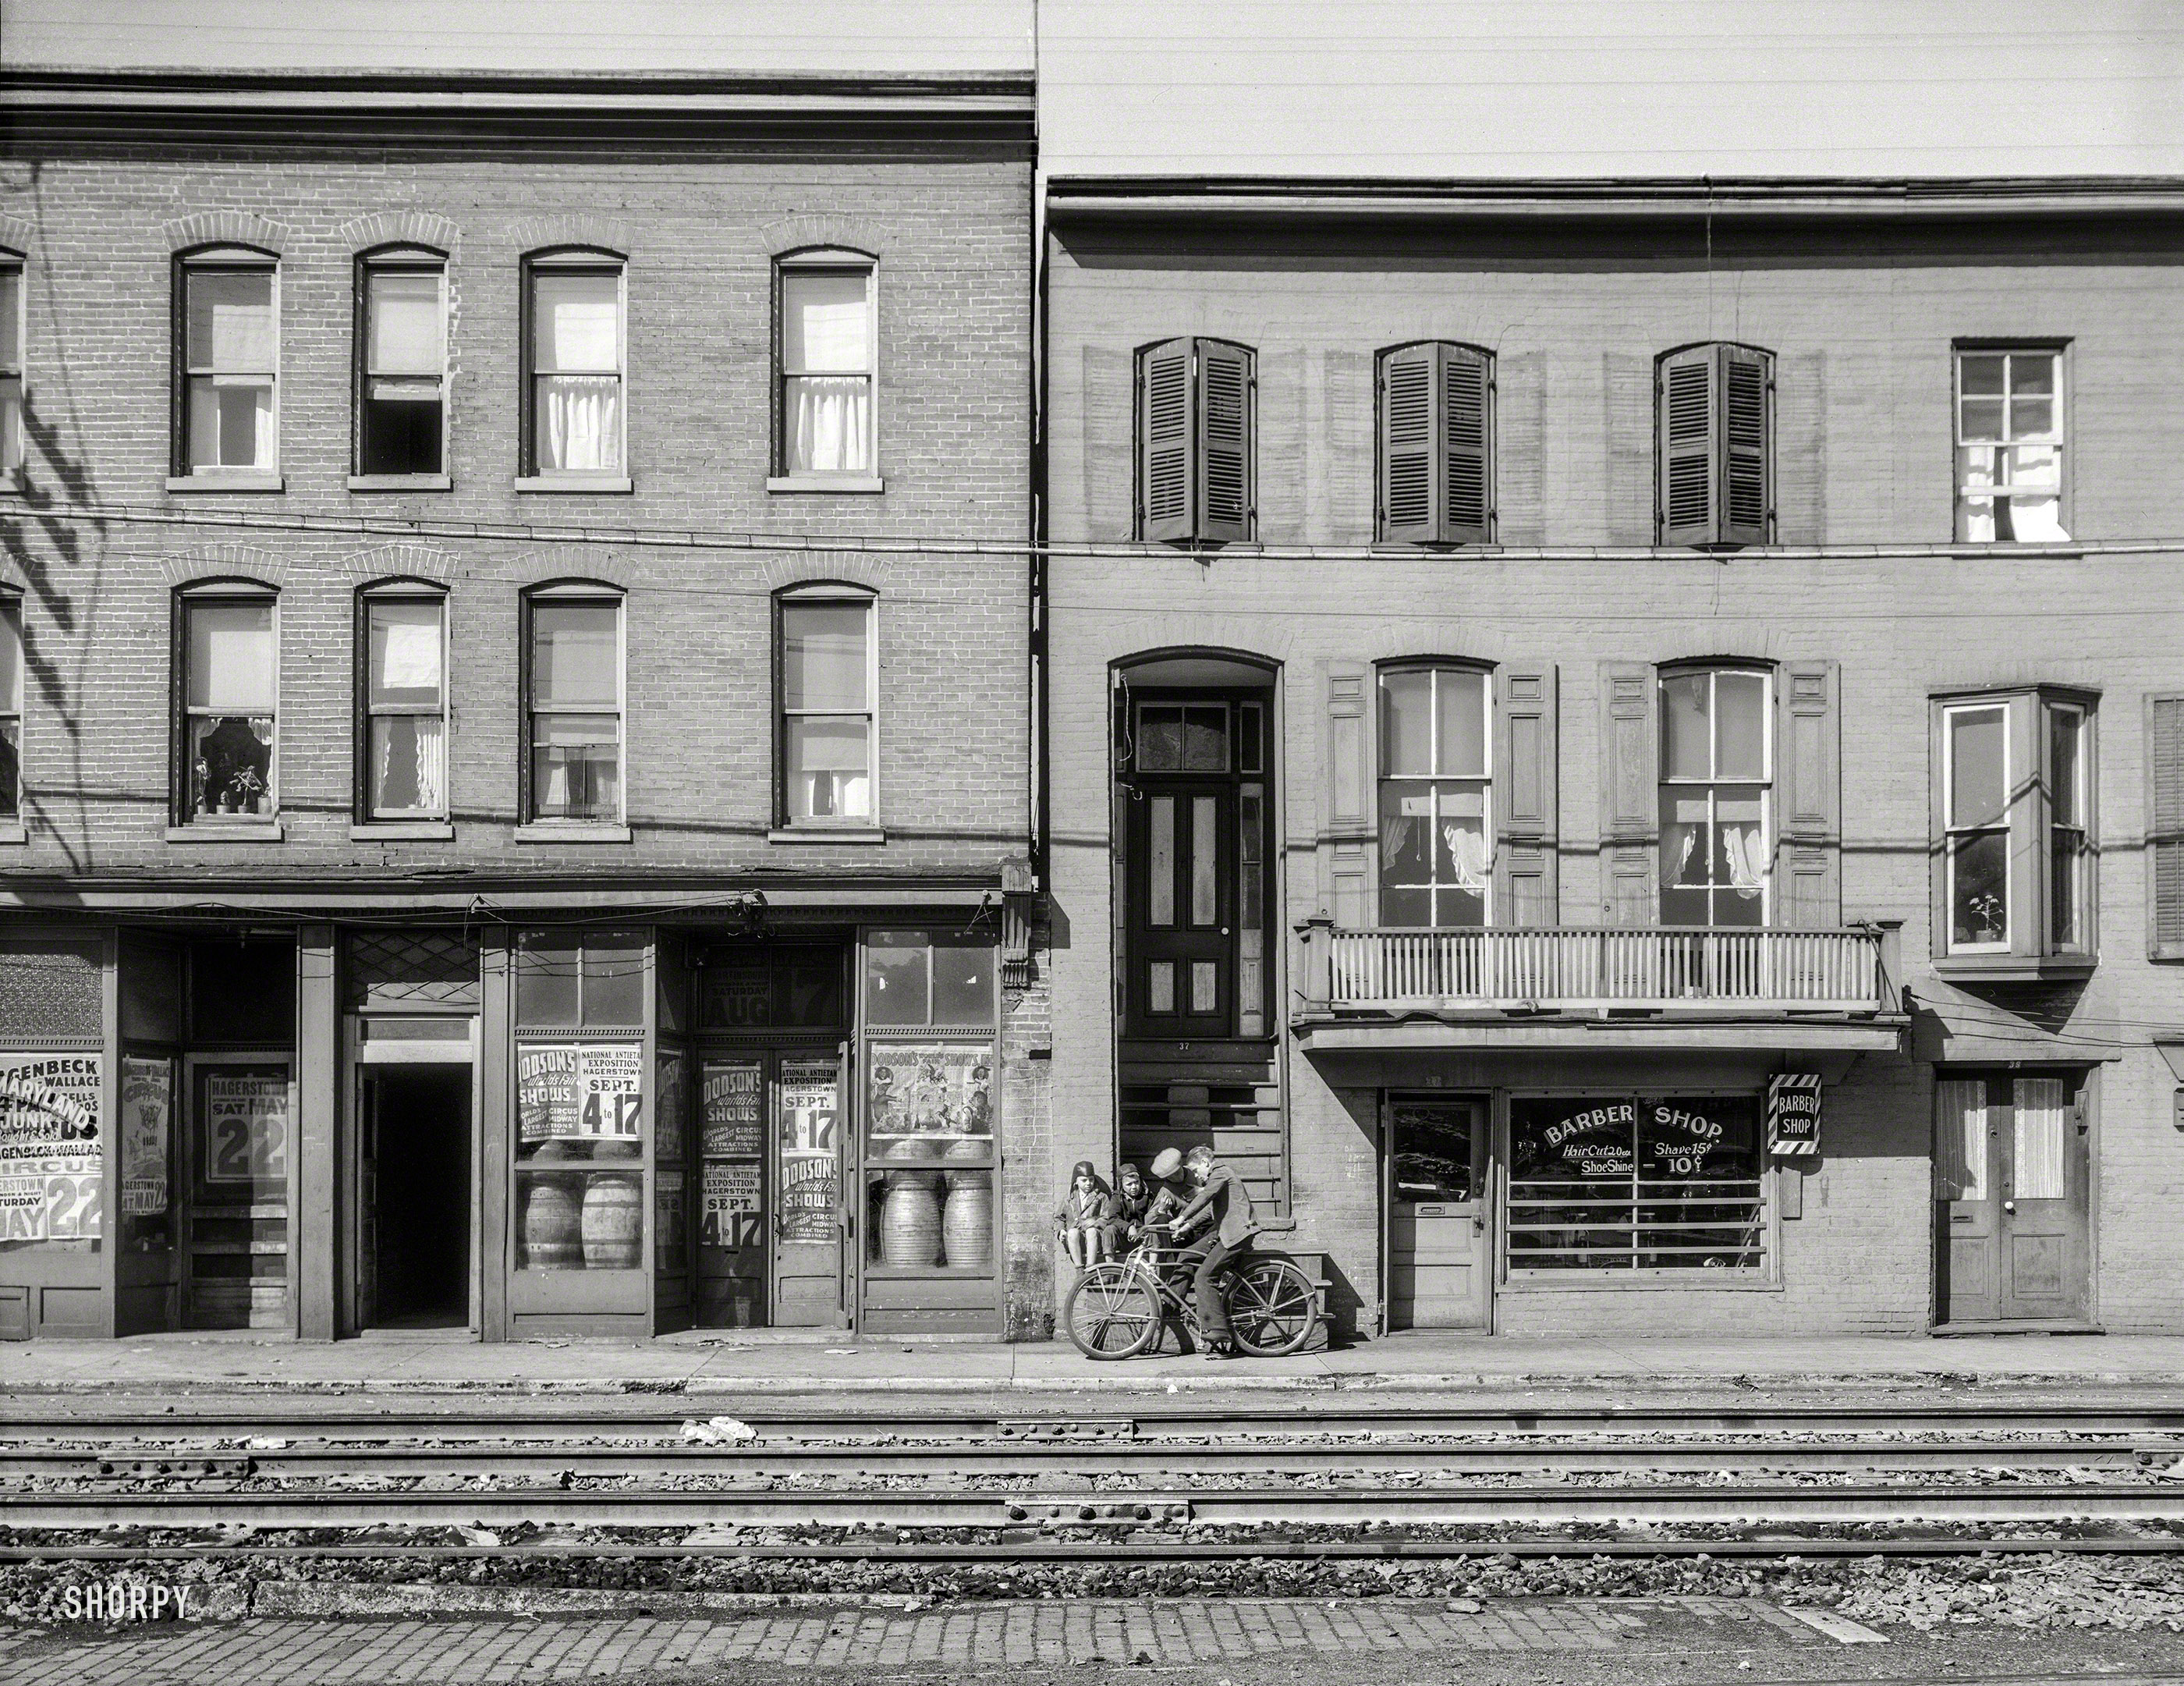 October 1937. "Houses near the railroad tracks. Hagerstown, Maryland." Our title comes from the storefront on the left. 4x5 inch acetate negative by Arthur Rothstein for the Farm Security Administration. View full size.